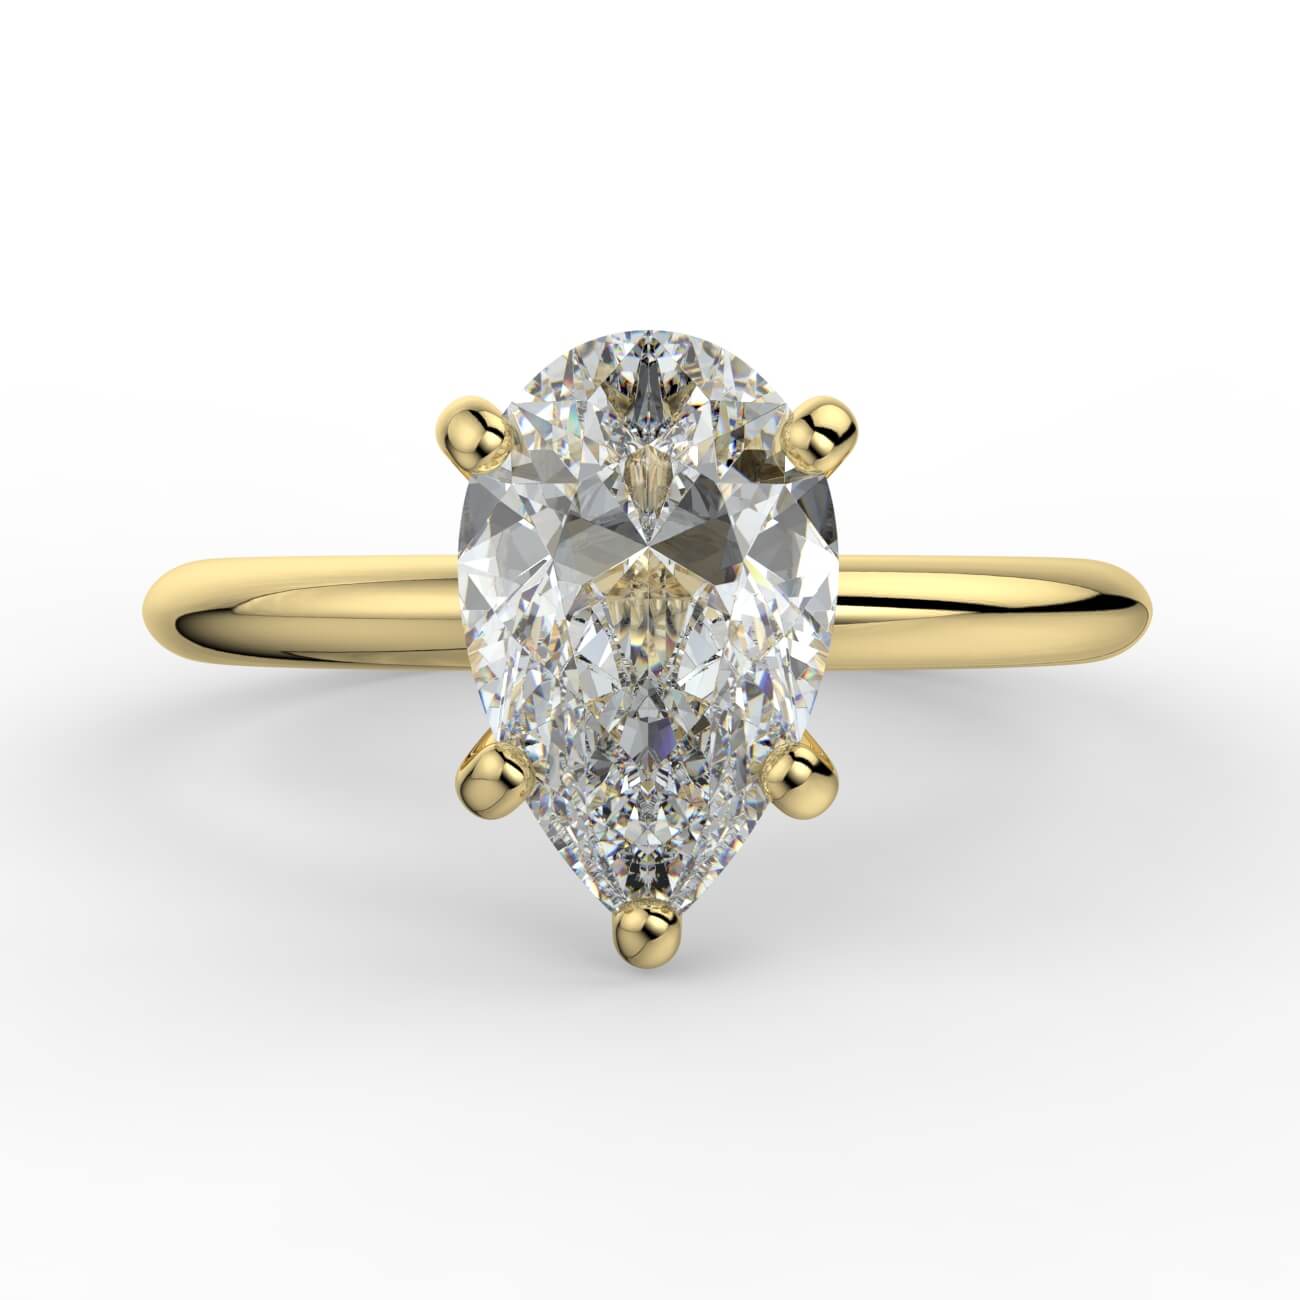 Solitaire pear shape diamond engagement ring in yellow gold – Australian Diamond Network